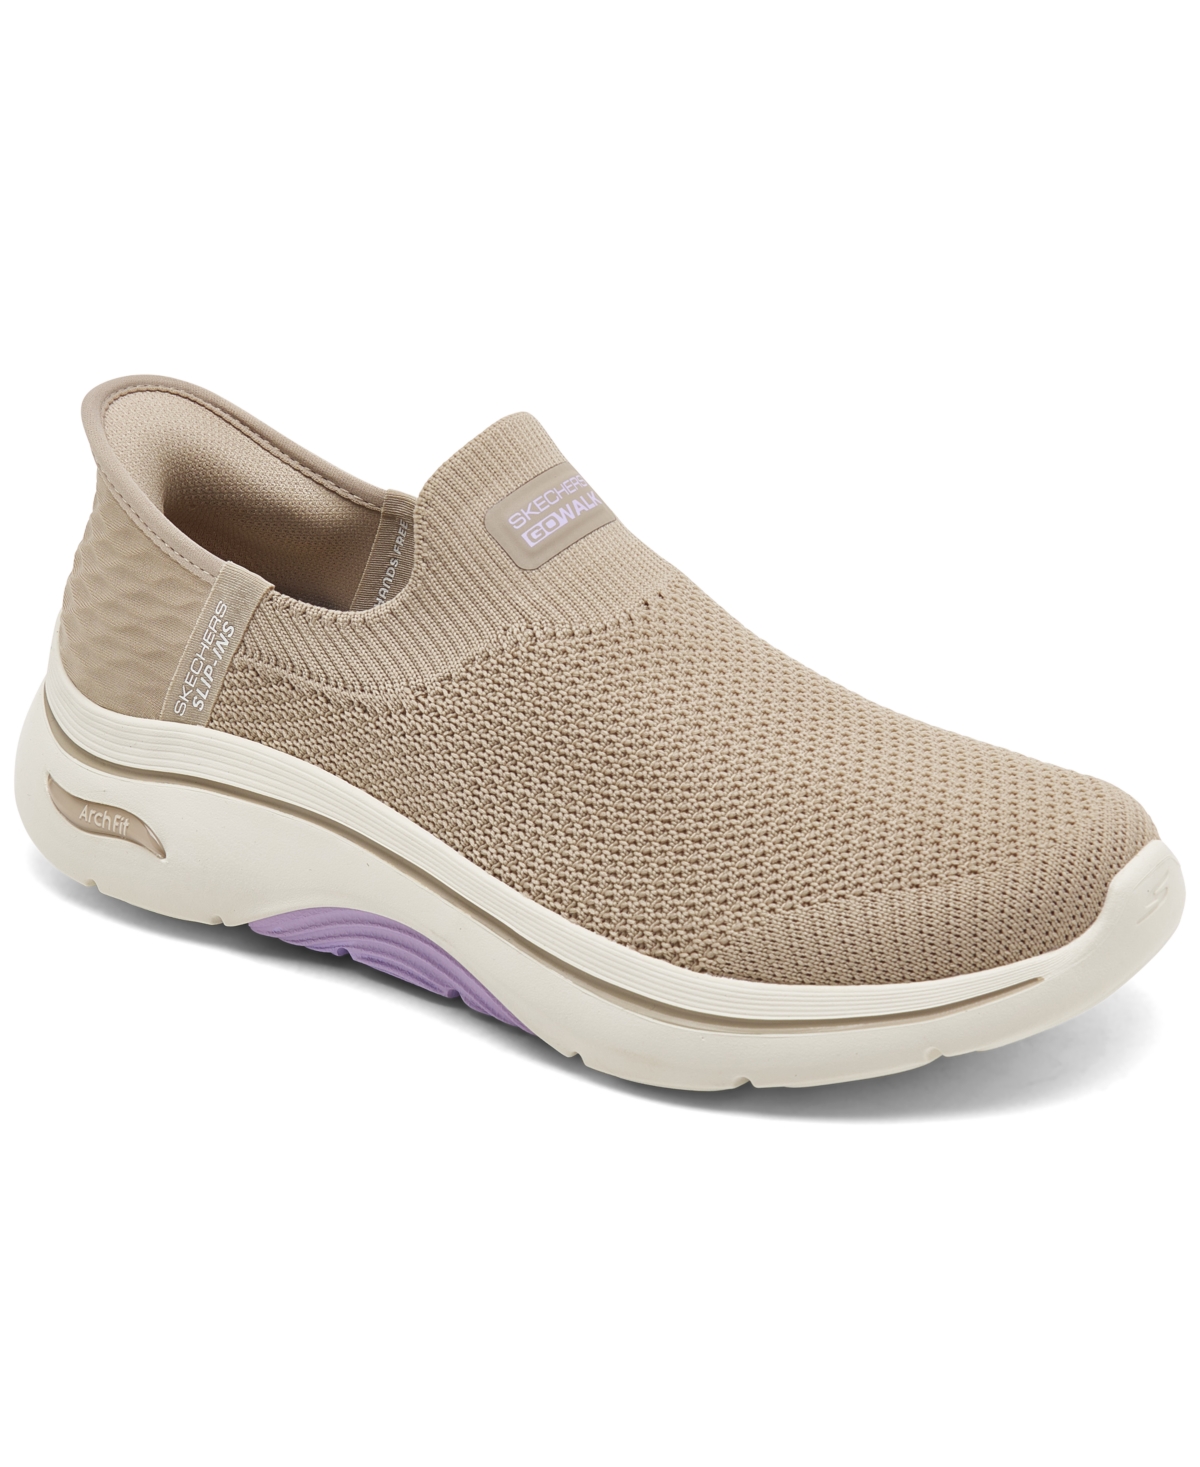 Women's Go Walk Arch Fit 2.0 - Val Walking Sneakers from Finish Line - Taupe/Lavender